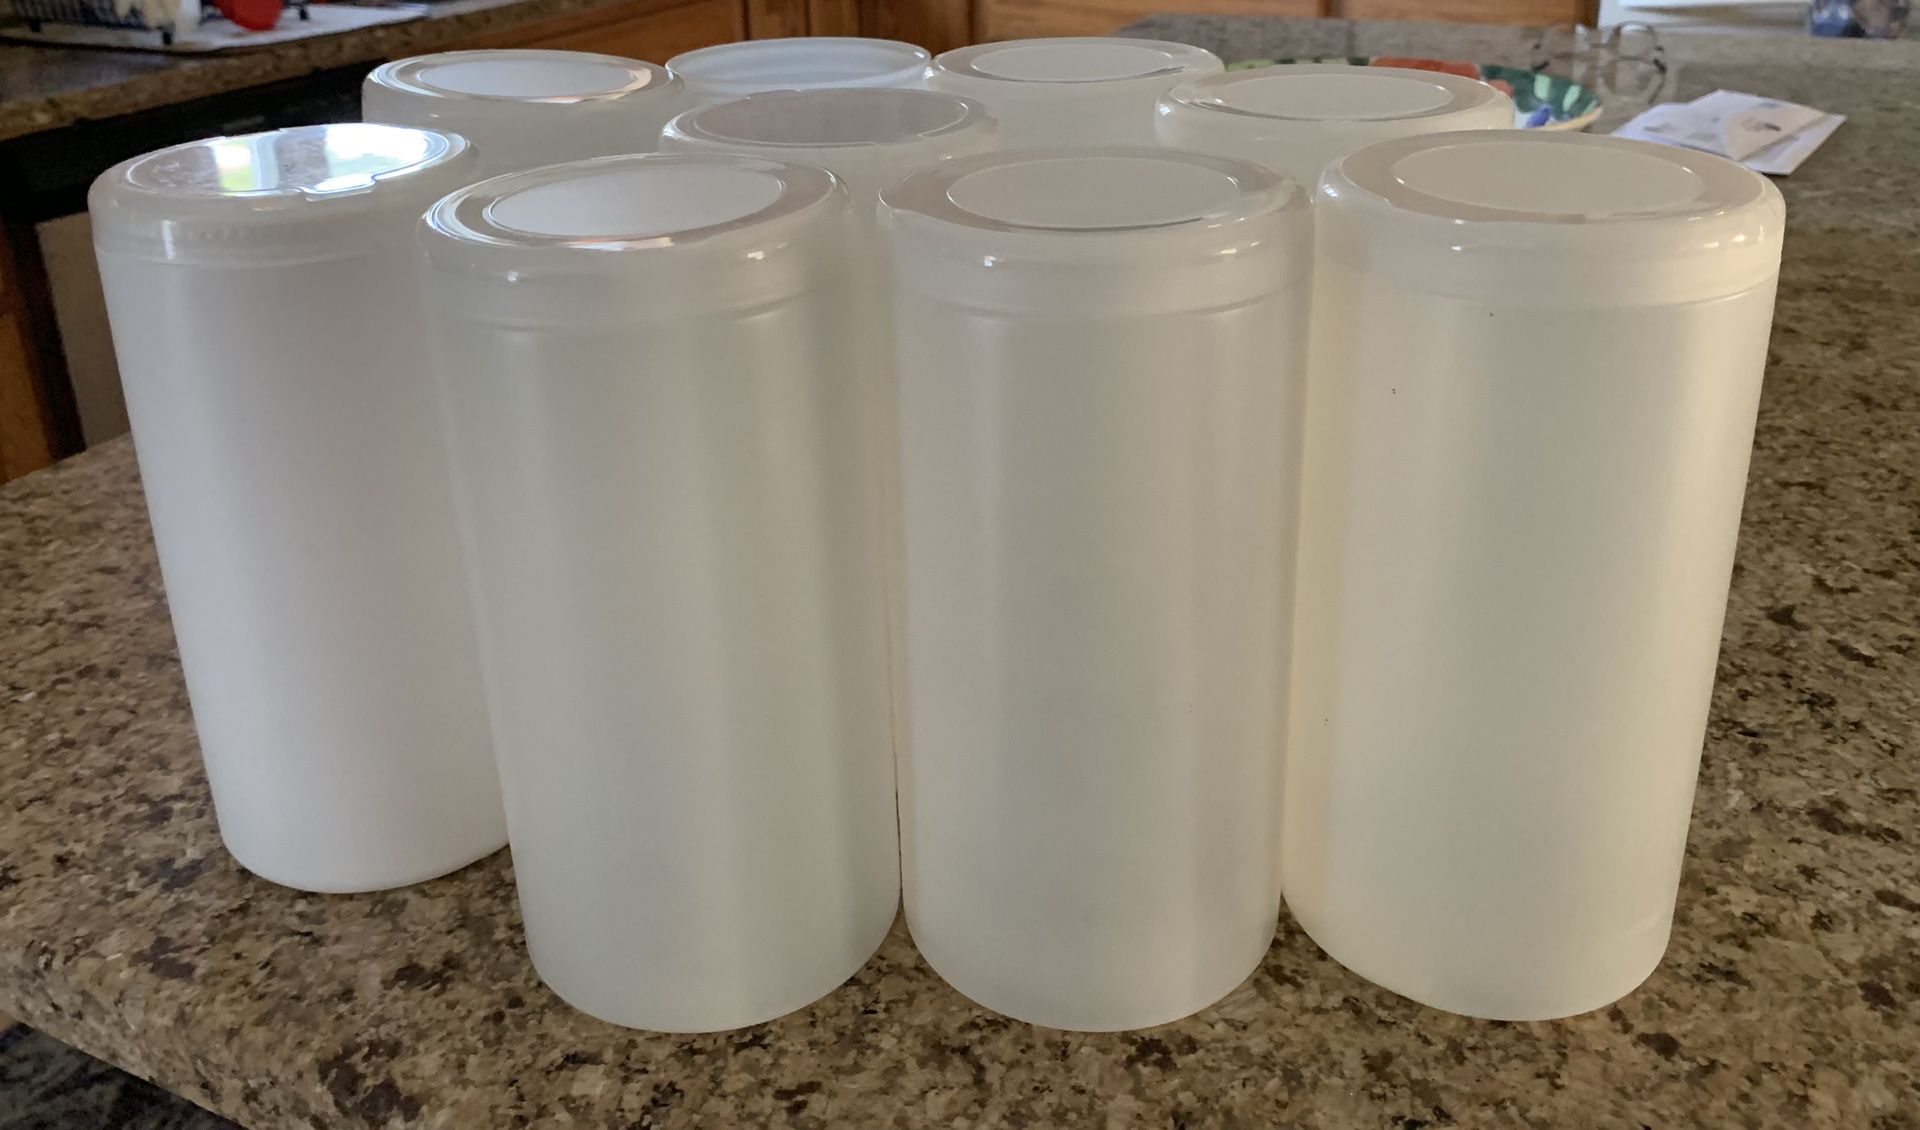 FREE Lot of Empty Large Cleaning Wipes Containers For Crafts And Storage 